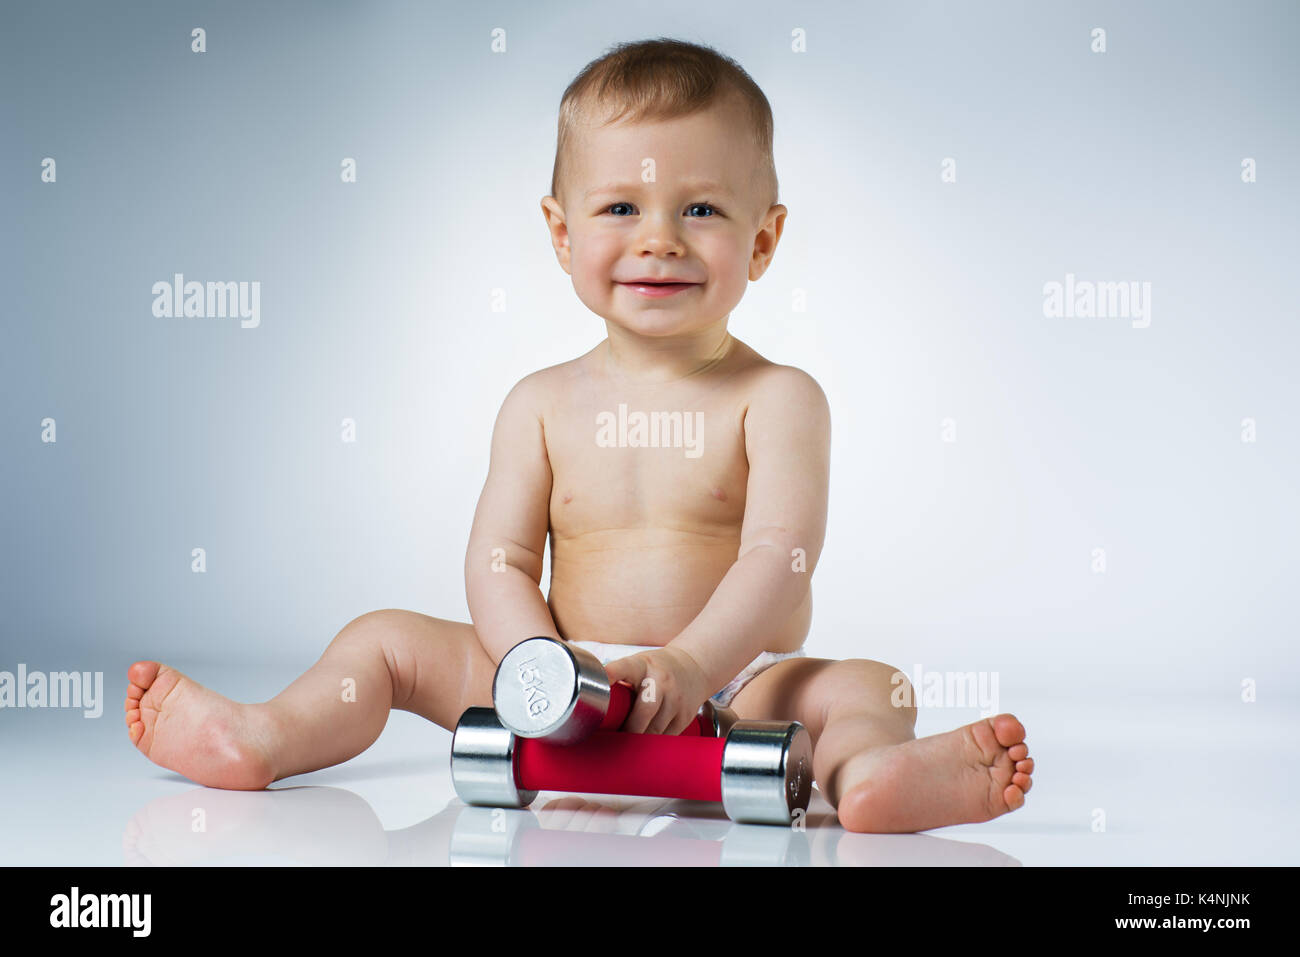 Eight month baby sitting with dumbbells and smiling on white background Stock Photo